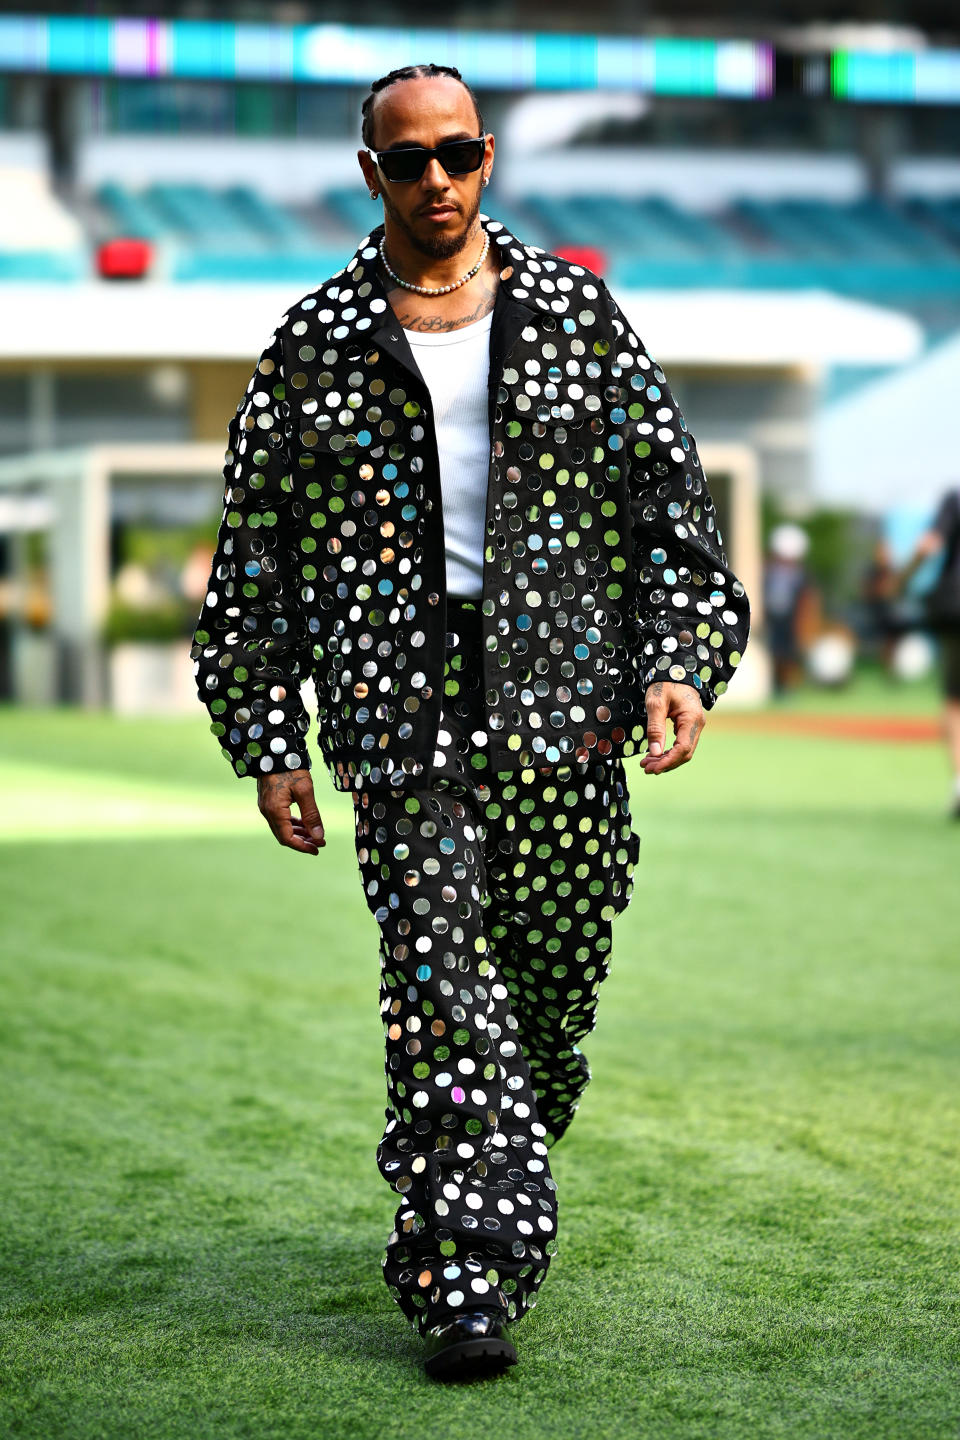 MIAMI, FLORIDA - MAY 04: Lewis Hamilton of Great Britain and Mercedes walks in the Paddock prior to the Sprint ahead of the F1 Grand Prix of Miami at Miami International Autodrome on May 04, 2024 in Miami, Florida. (Photo by Jared C. Tilton - Formula 1/Formula 1 via Getty Images)